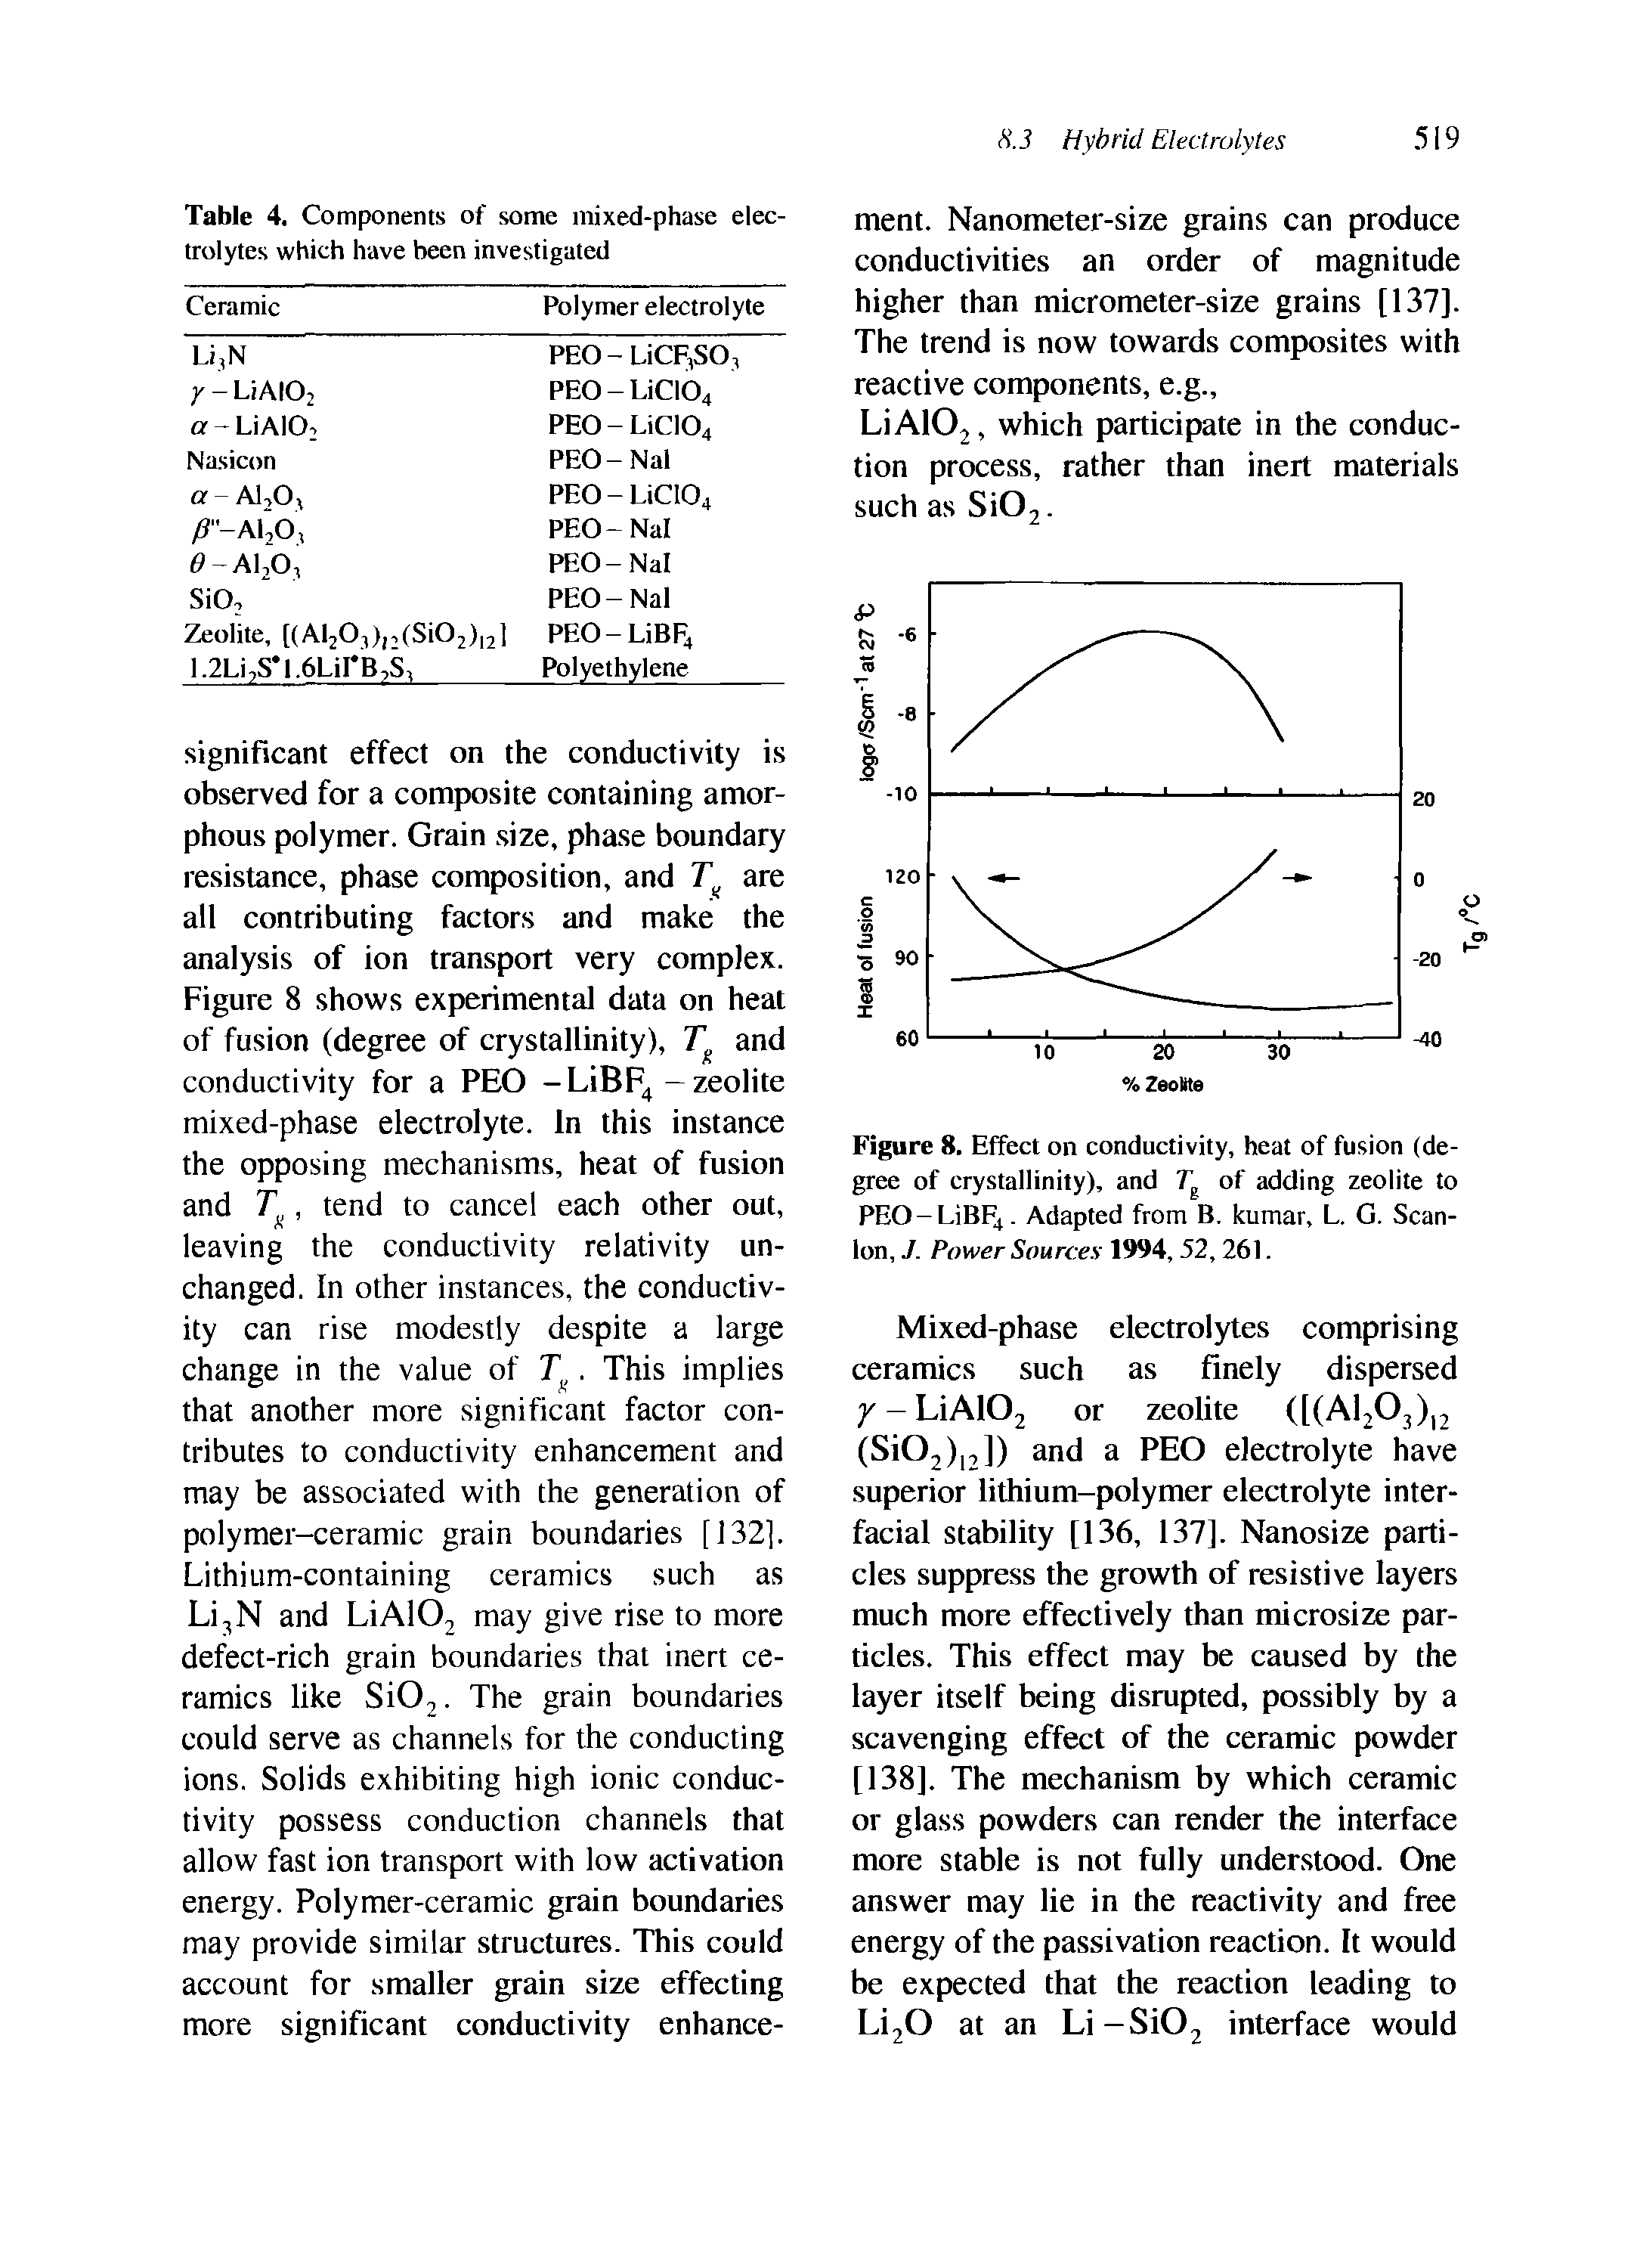 Figure 8. Effect on conductivity, heat of fusion (degree of crystallinity), and Tg of adding zeolite to PEO-UBF4. Adapted from B. kumar, L. G. Scanlon, J. Power Sources 1994, 52, 261.